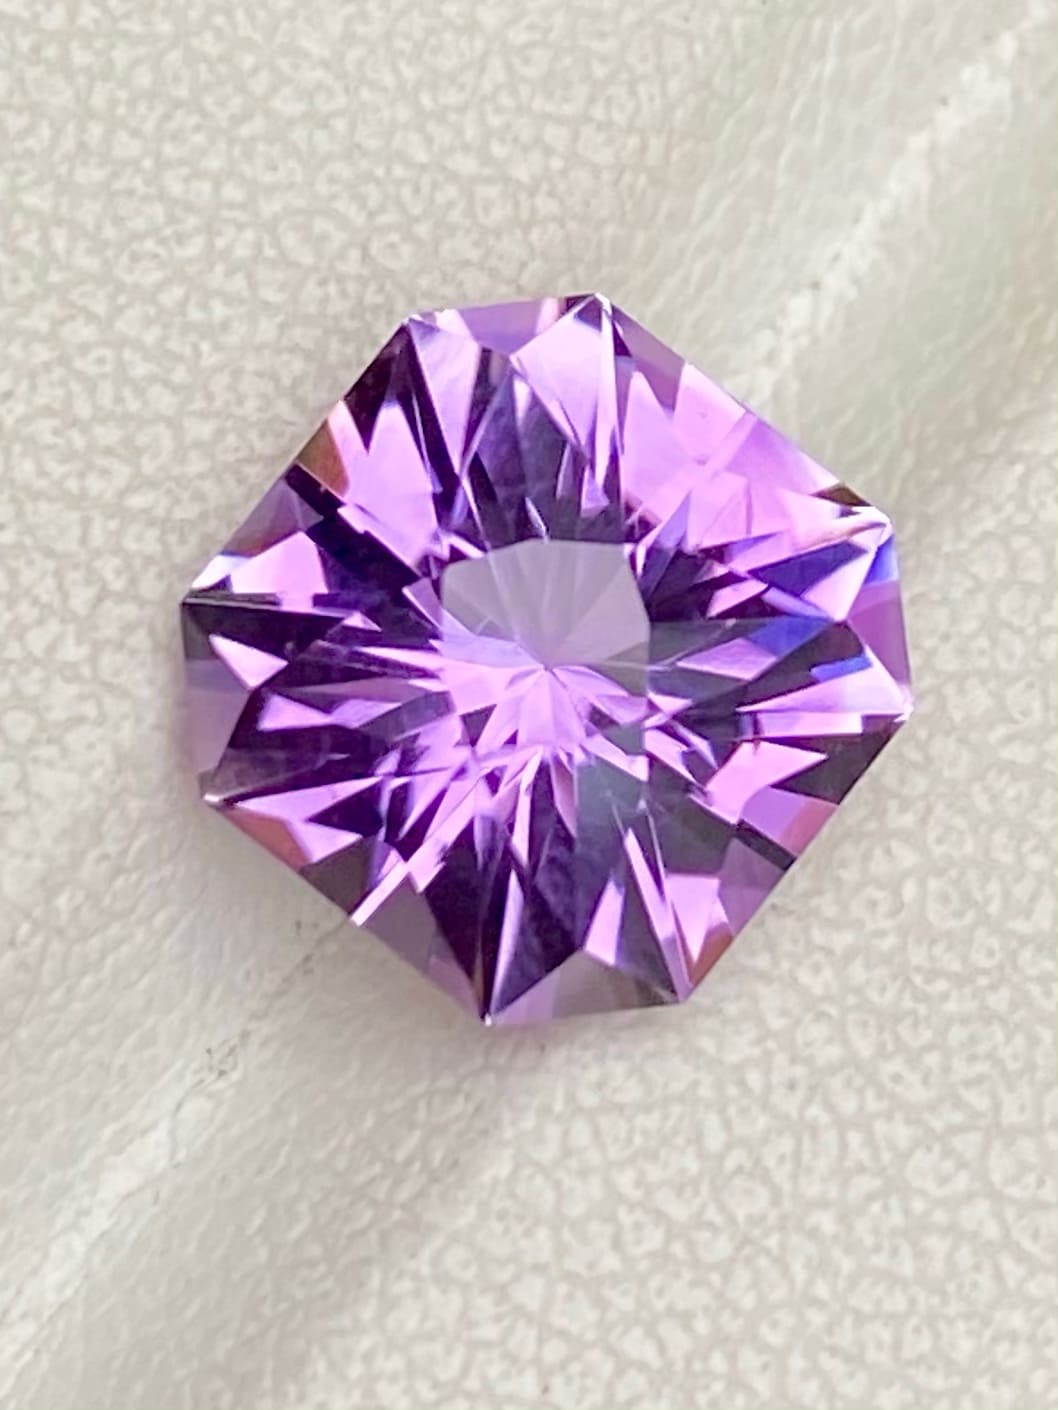 Gorgeously Faceted Purple Amethyst